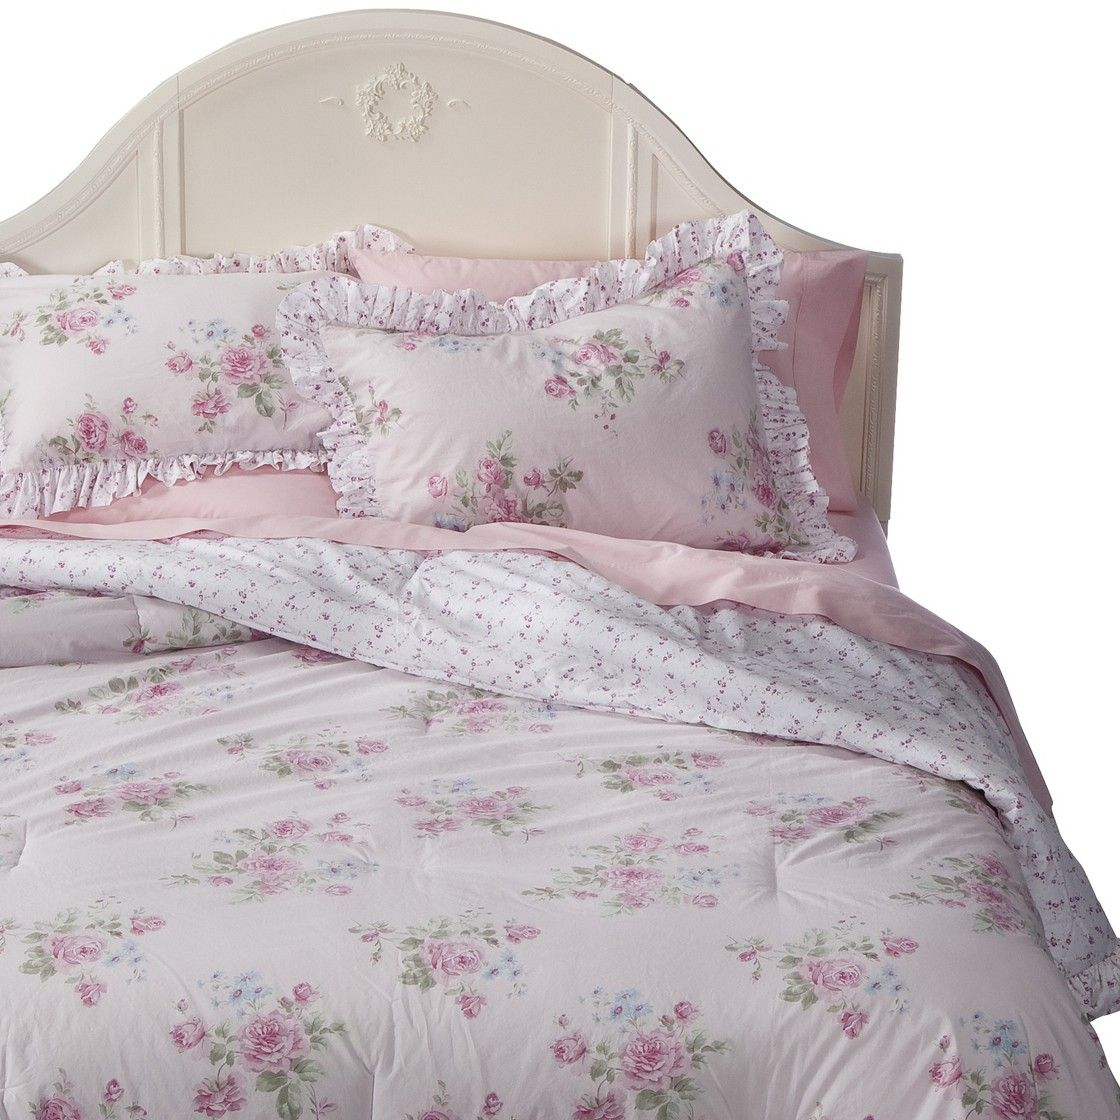 Simply Shabby Chic Pink Comforter - Simplythinkshabby dedans Simply Shabby Chic Bedding 